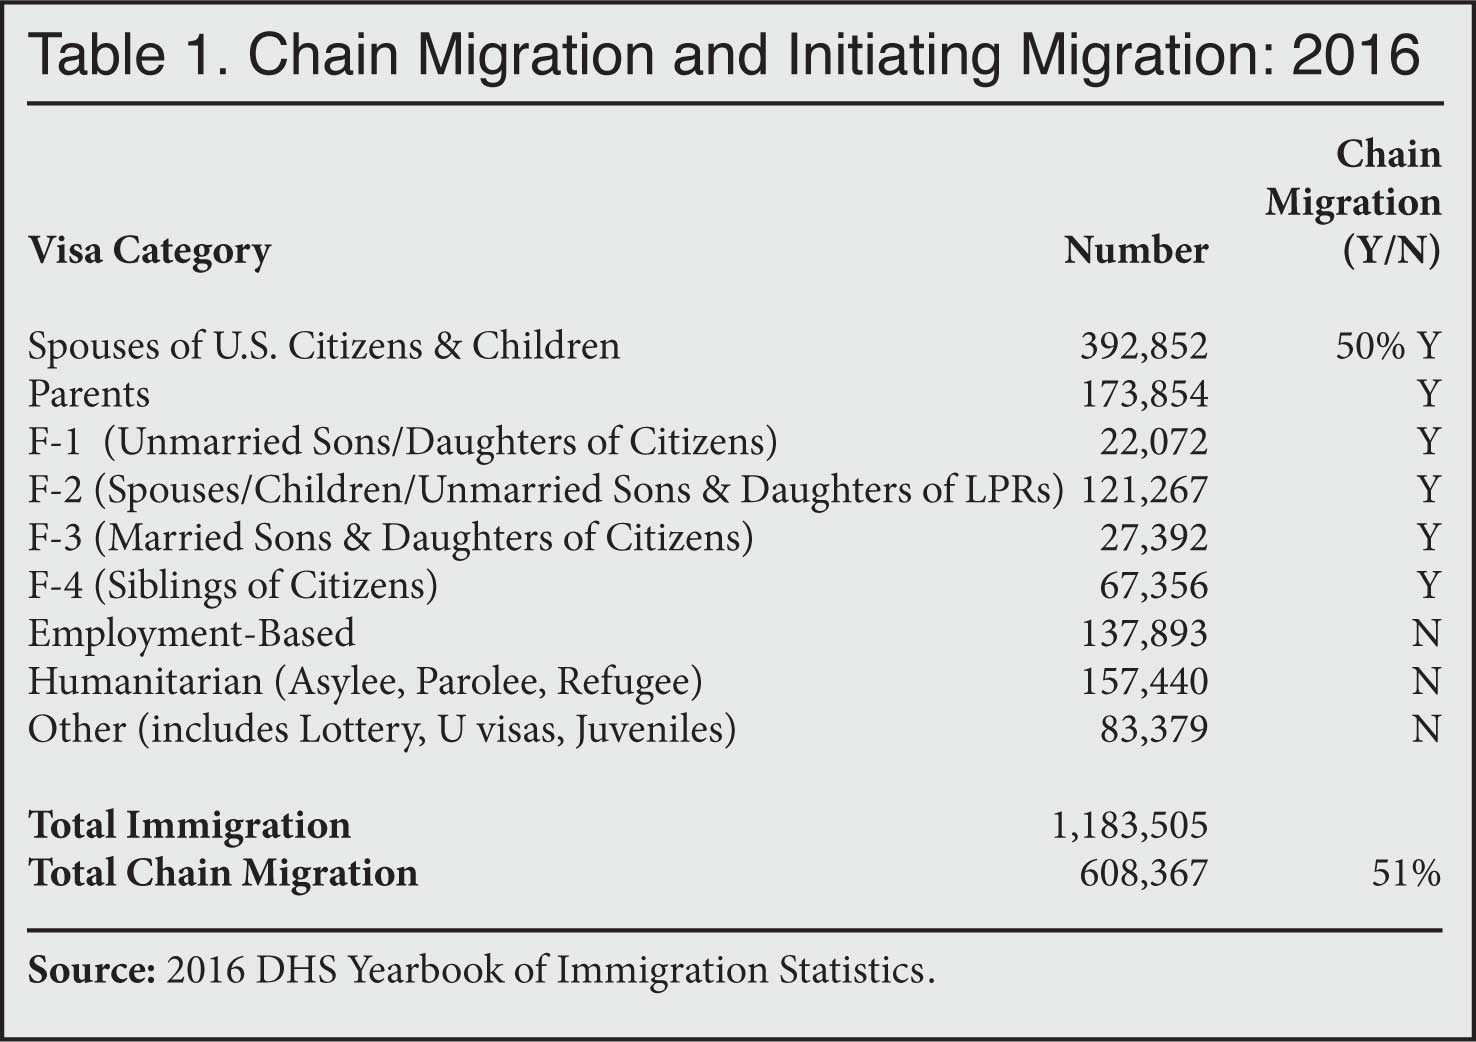 Table: Chain Migration and Initiating Migration, 2015